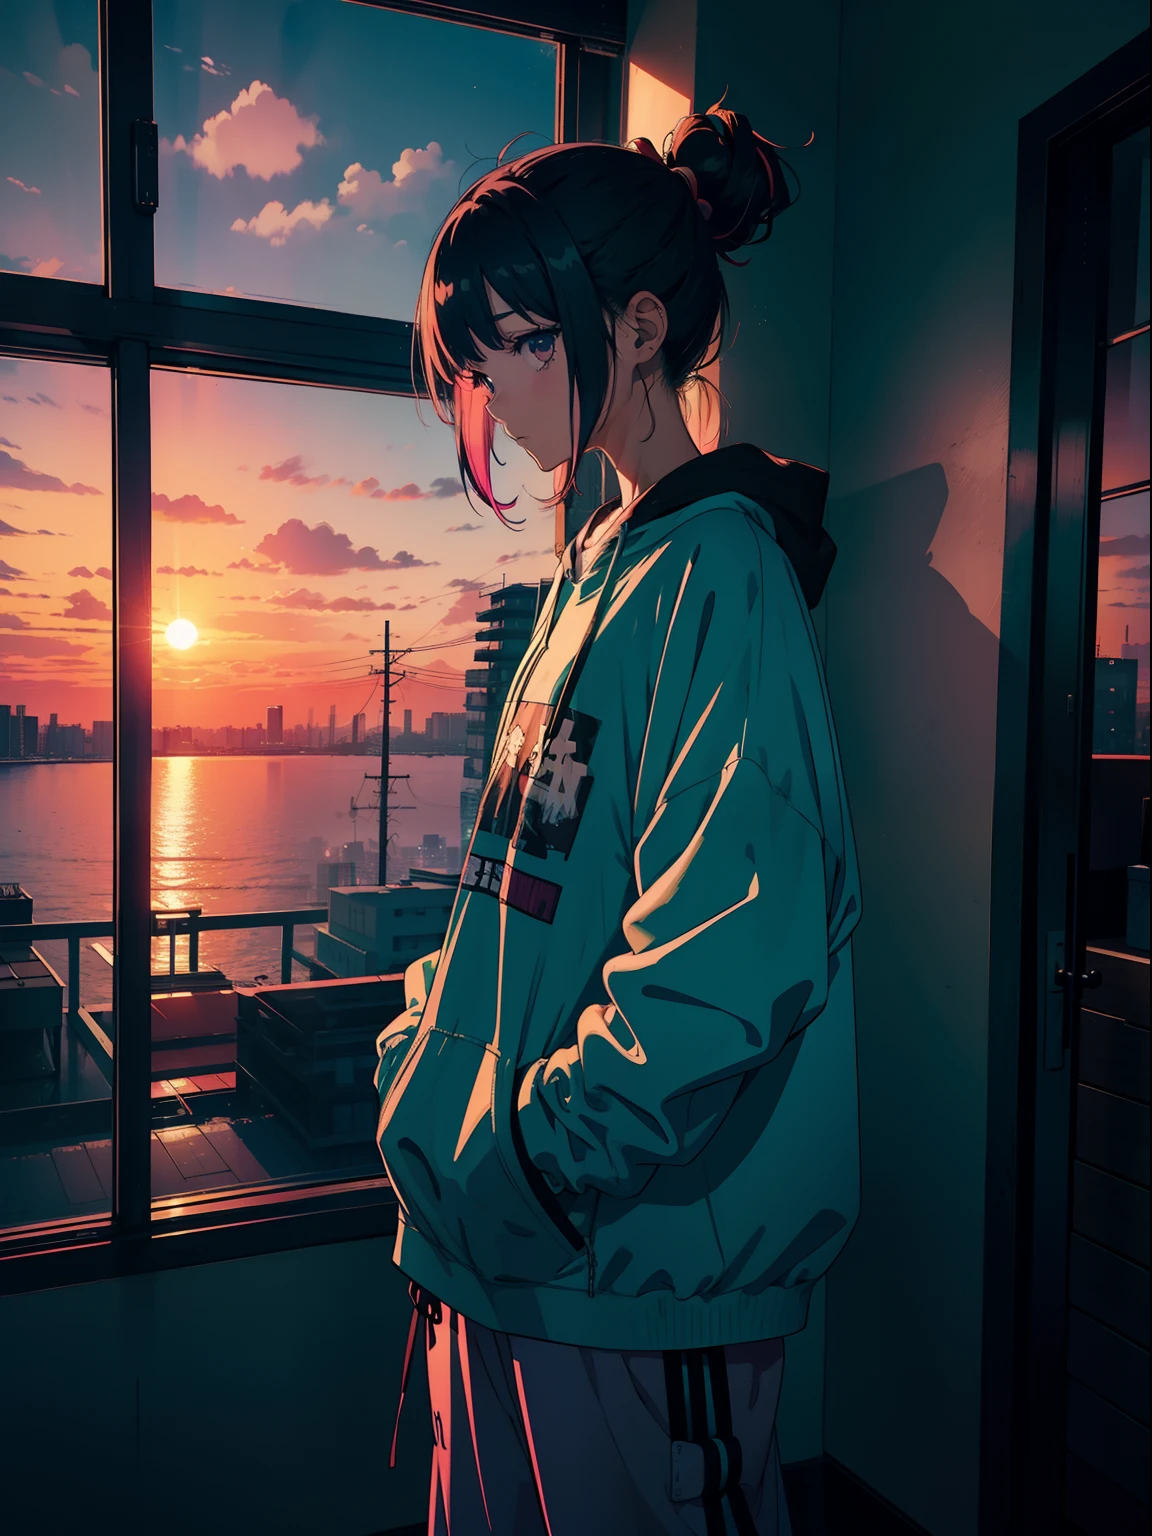 A woman standing in front of a window looking out at the sunset - SeaArt AI